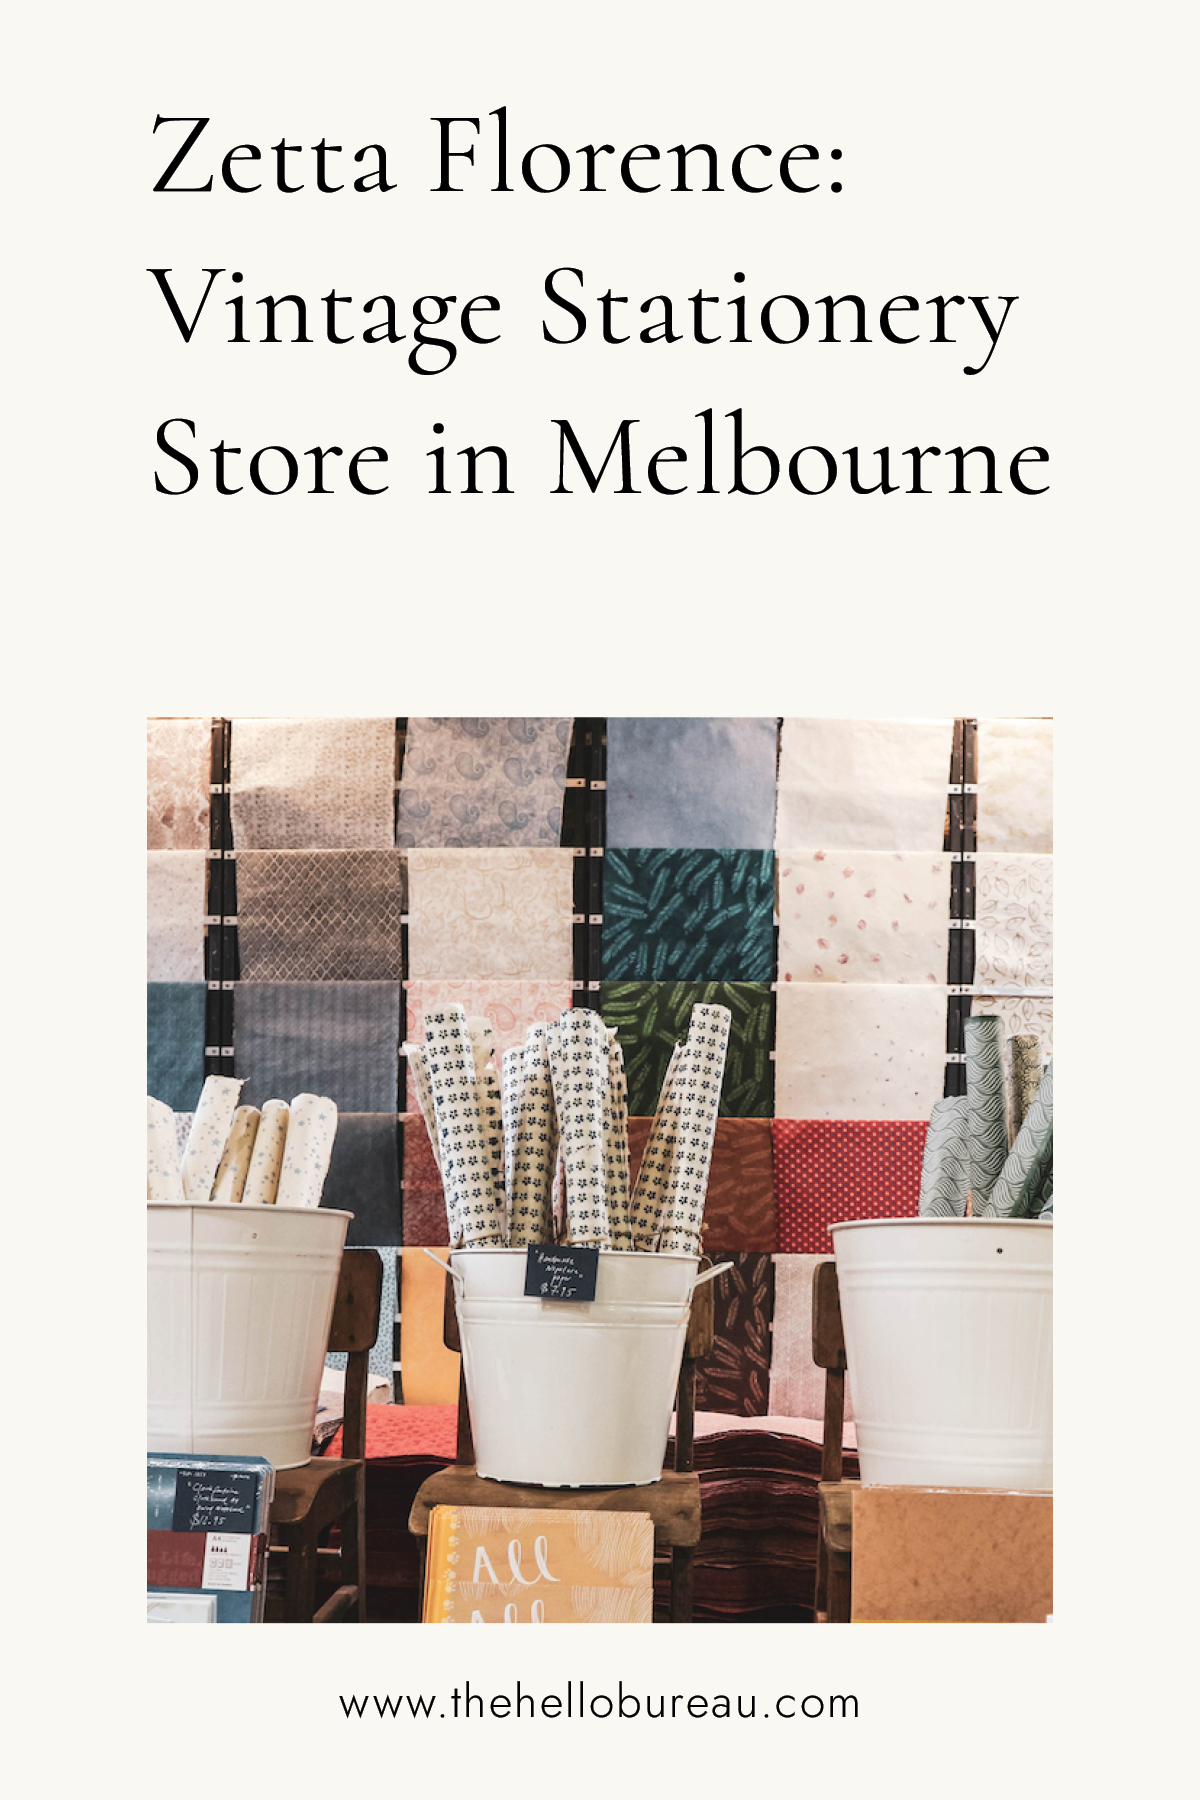 Zetta Florence: Vintage Stationery Store in Melbourne